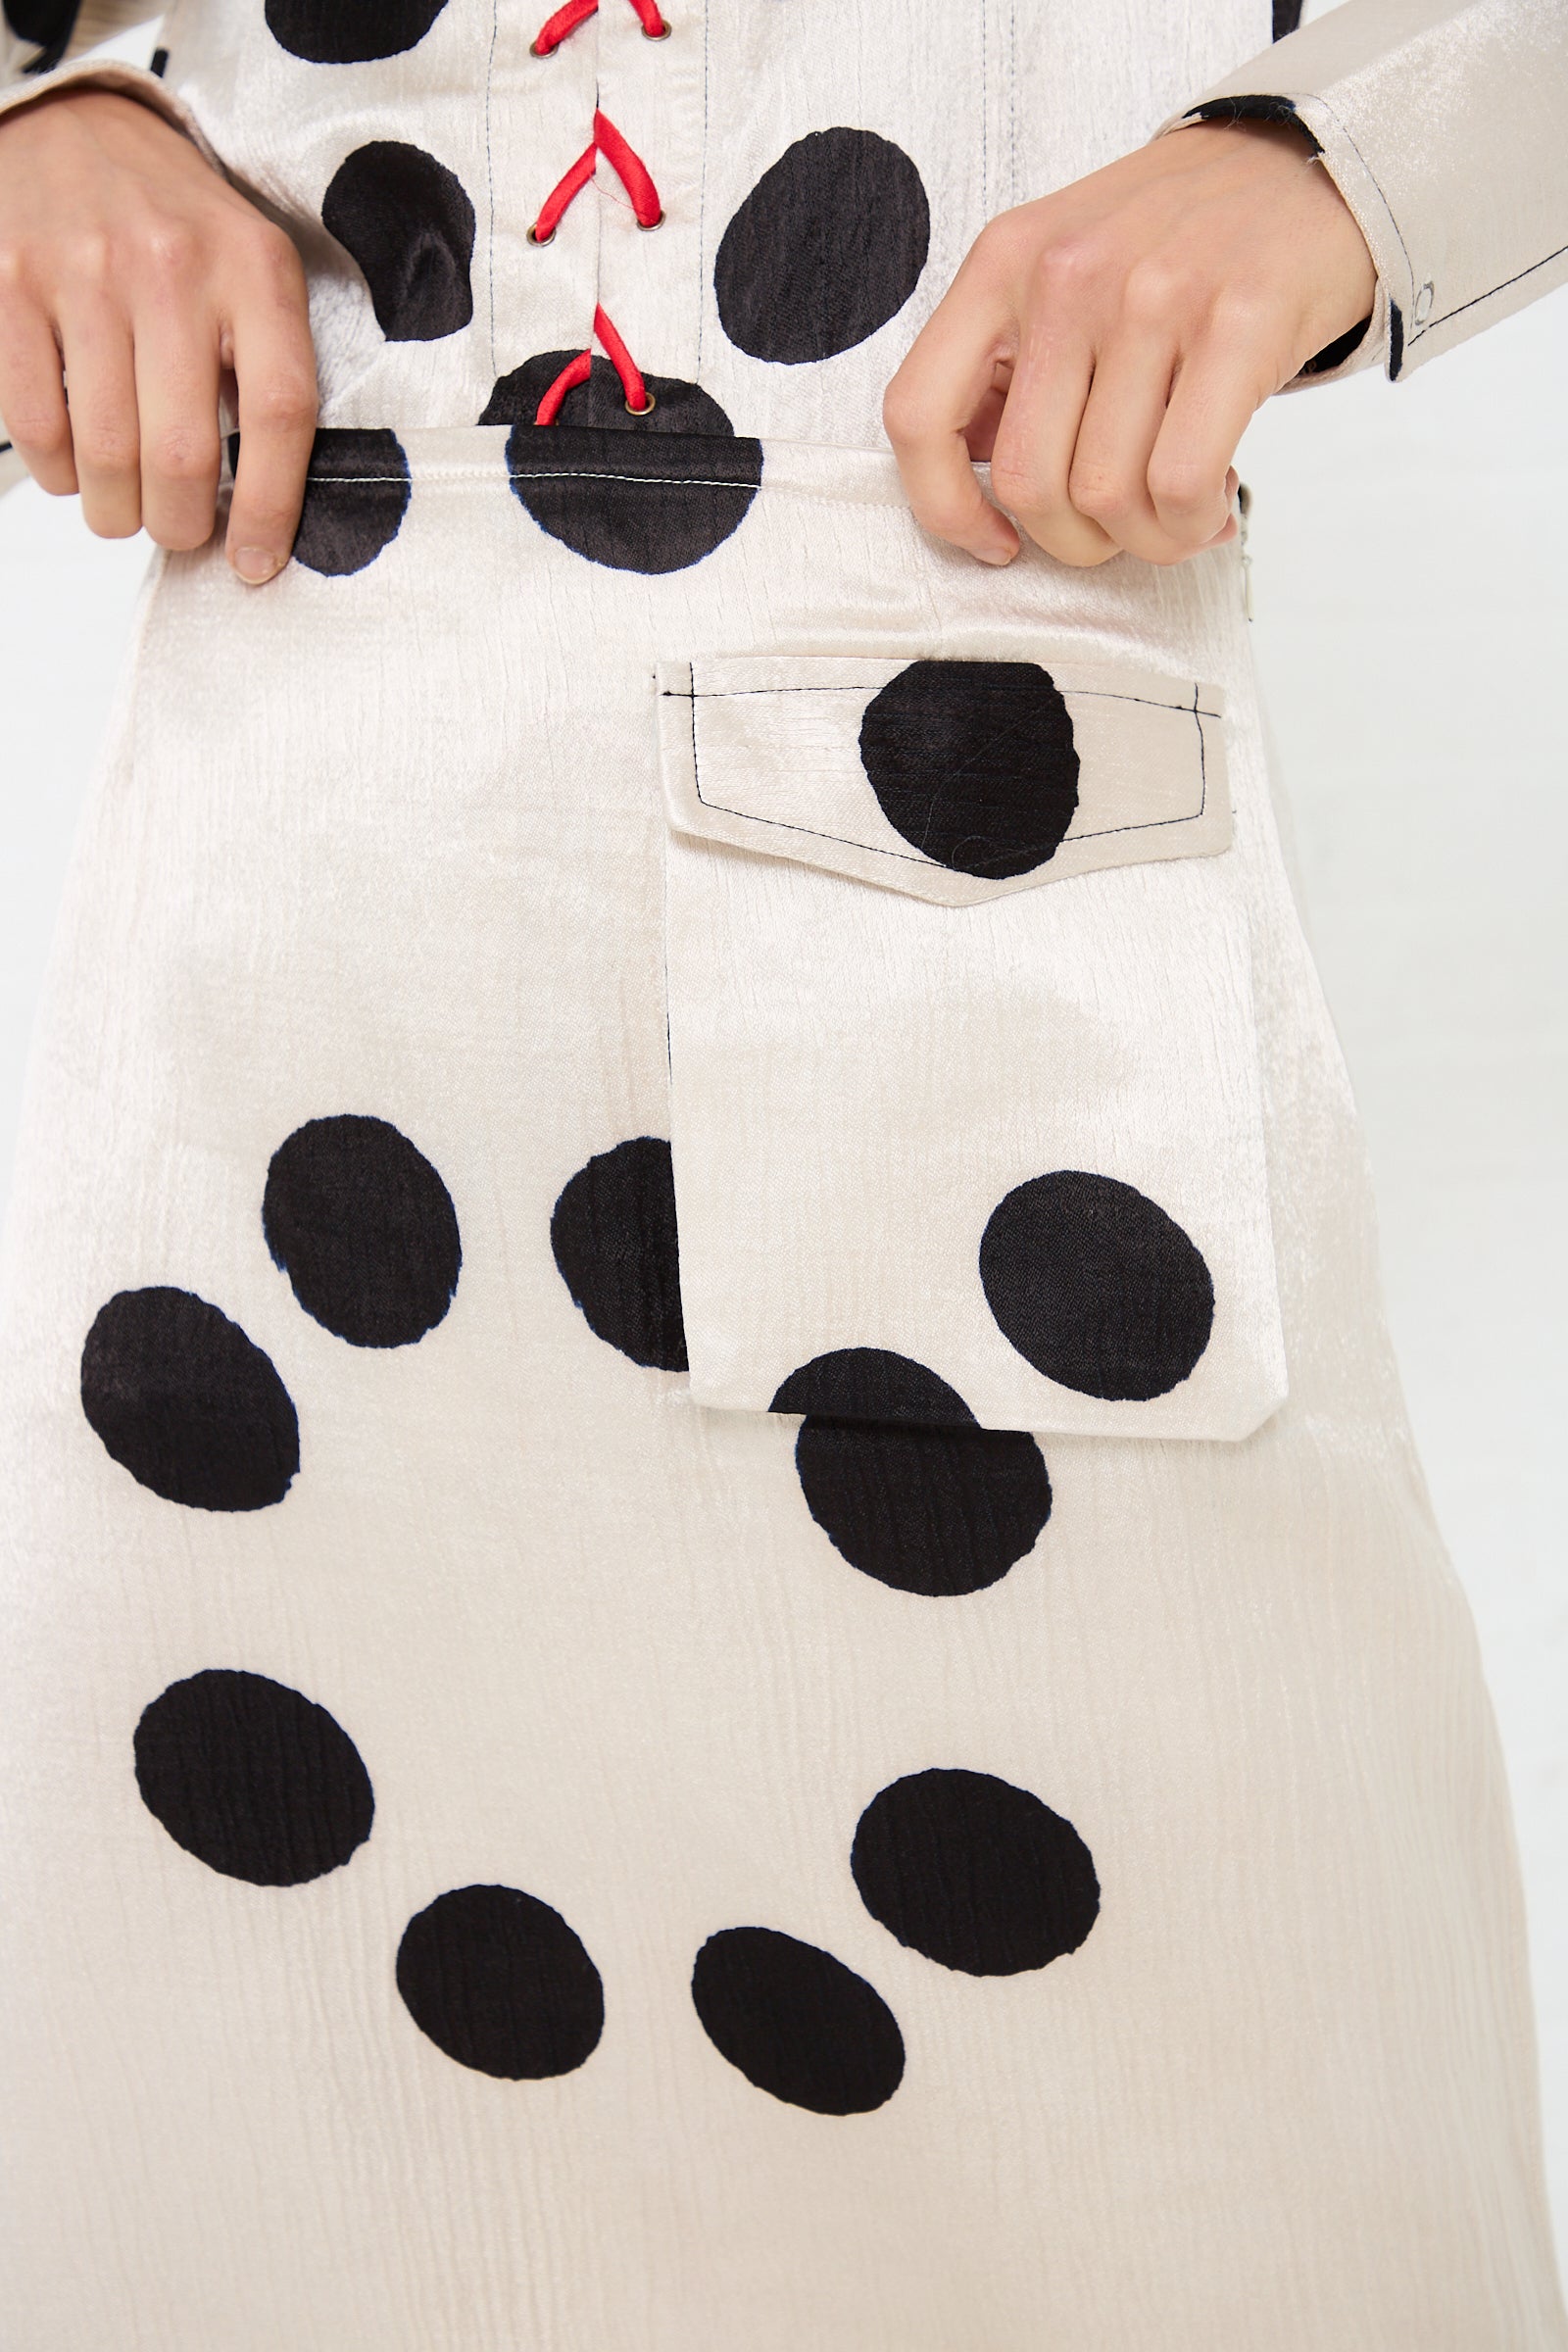 A person adjusts a pocket on a beige garment with large black polka dots. The Silk Mashroo Midi Skirt from TIGRA TIGRA features red lacing on the upper section, adding an elegant touch to its unique design.